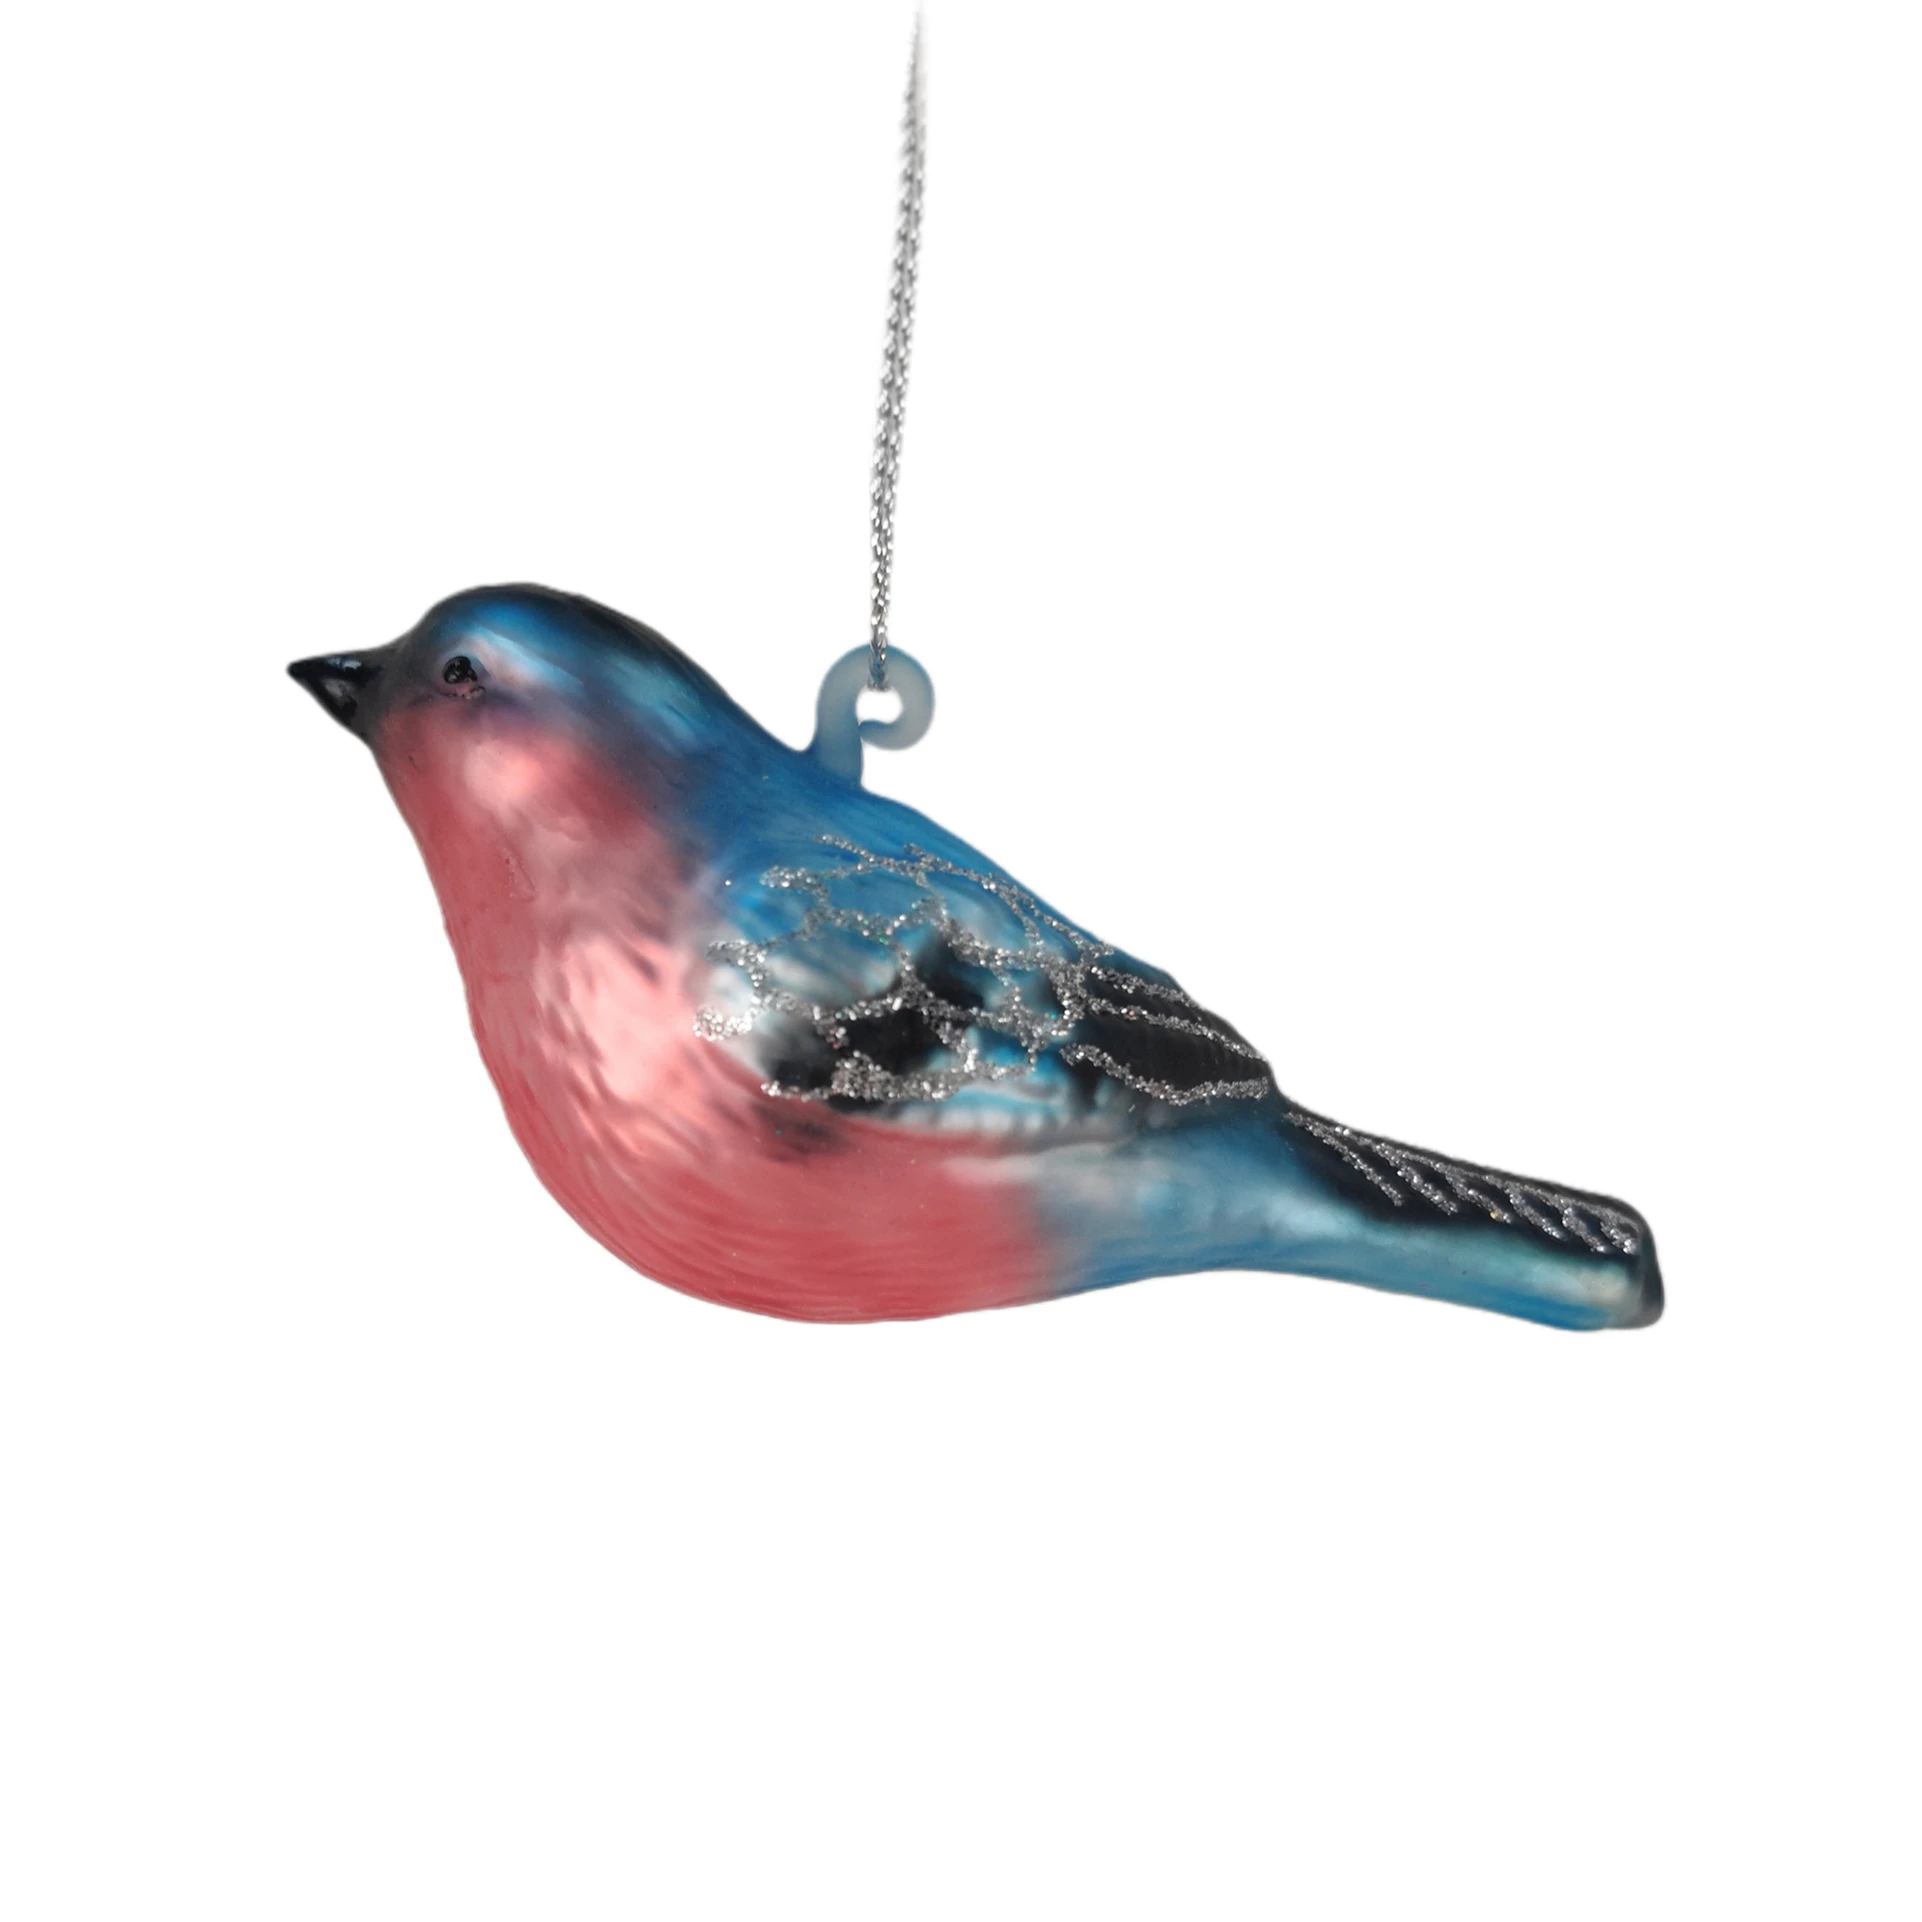 
red and blue hanging glass decoration bird figurine for spring  (1700003283913)